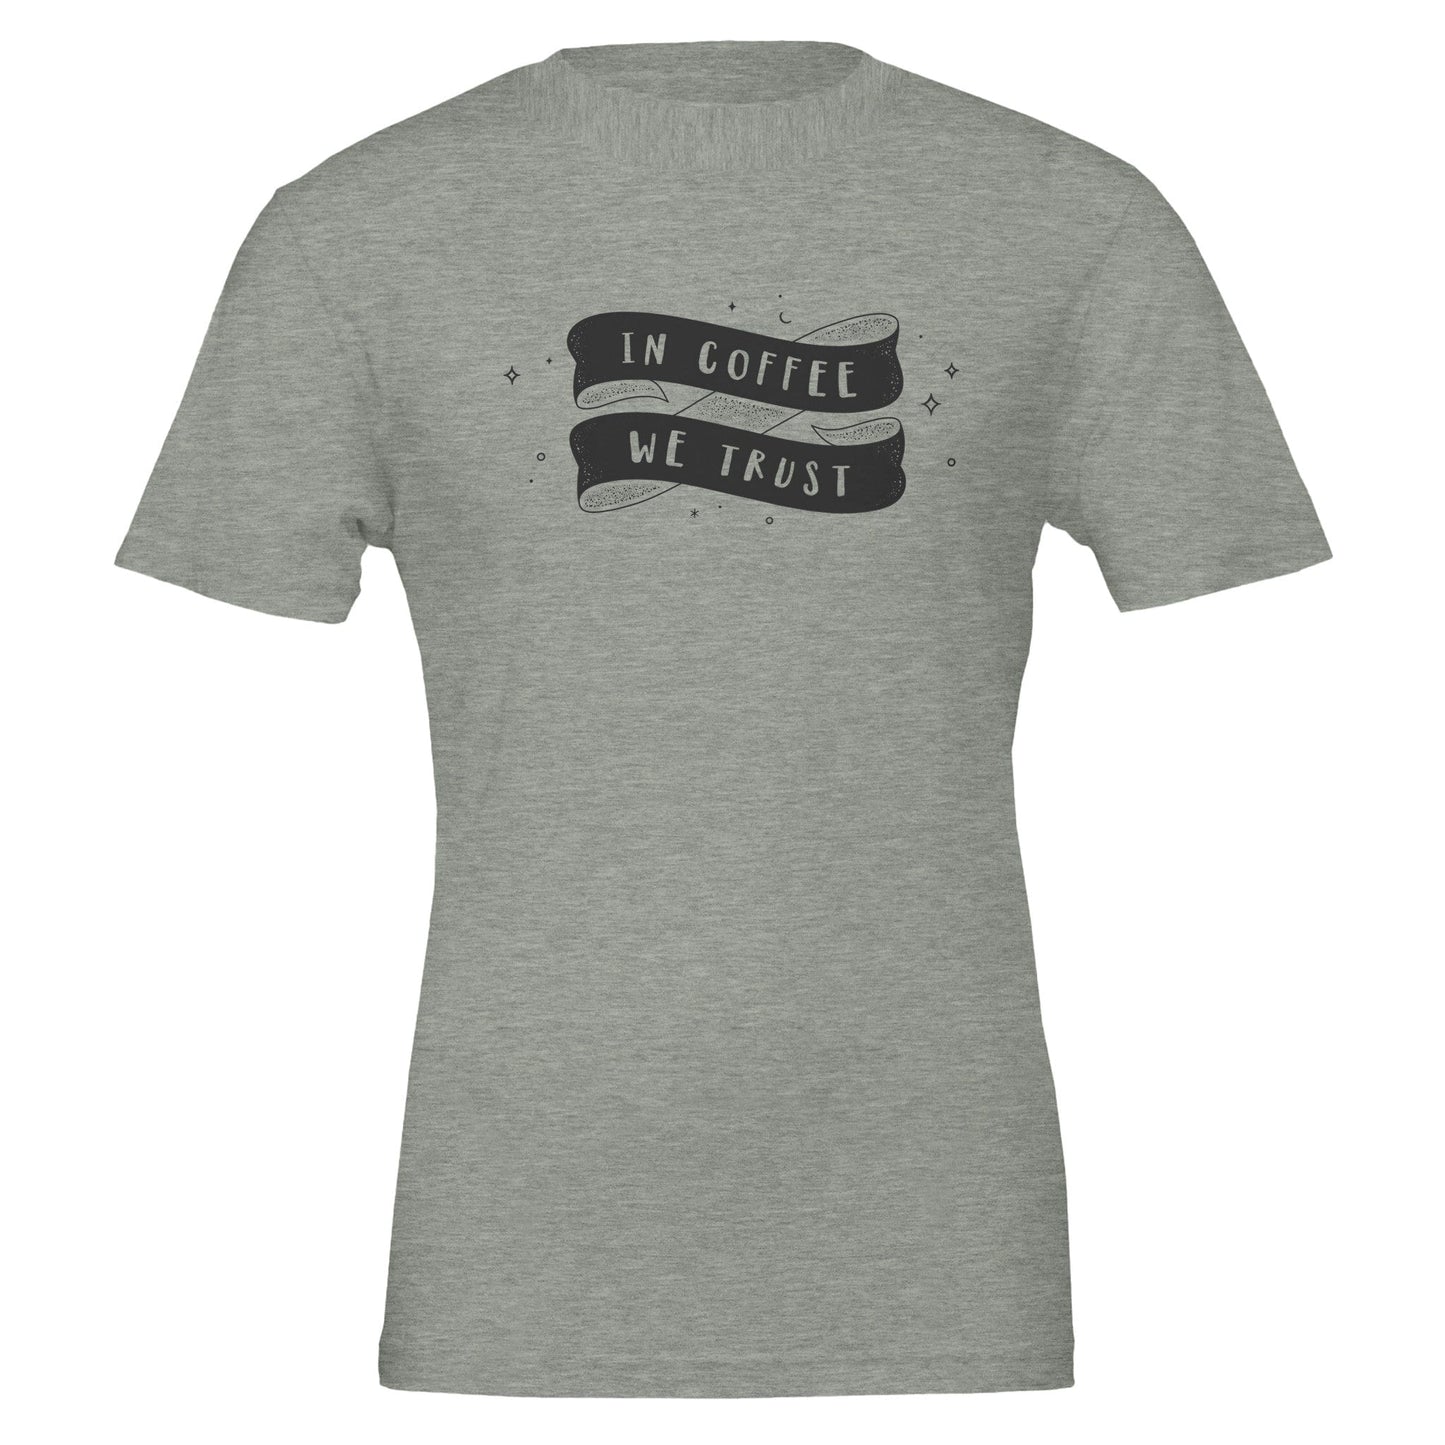 Good Bean Gifts "In Coffee We Trust" Unisex Crewneck T-shirt | Bella + Canvas 3001 Athletic Heather / S